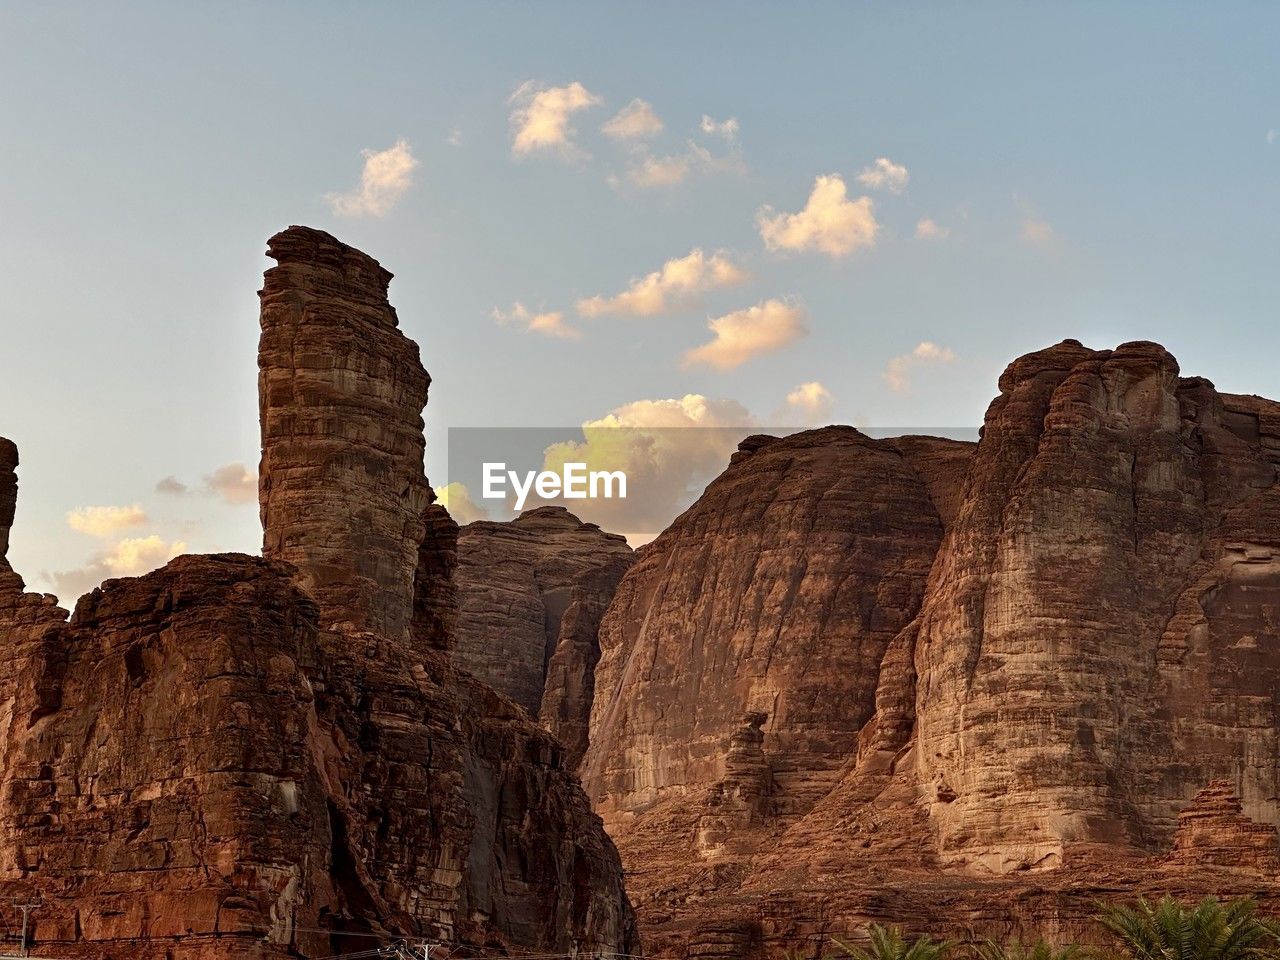 rock, rock formation, sky, nature, landscape, travel destinations, environment, scenics - nature, travel, arch, land, beauty in nature, geology, cloud, no people, non-urban scene, cliff, desert, mountain, outdoors, terrain, tranquility, valley, formation, tourism, wadi, canyon, eroded, plant, sunset, tranquil scene, sandstone, semi-arid, natural environment